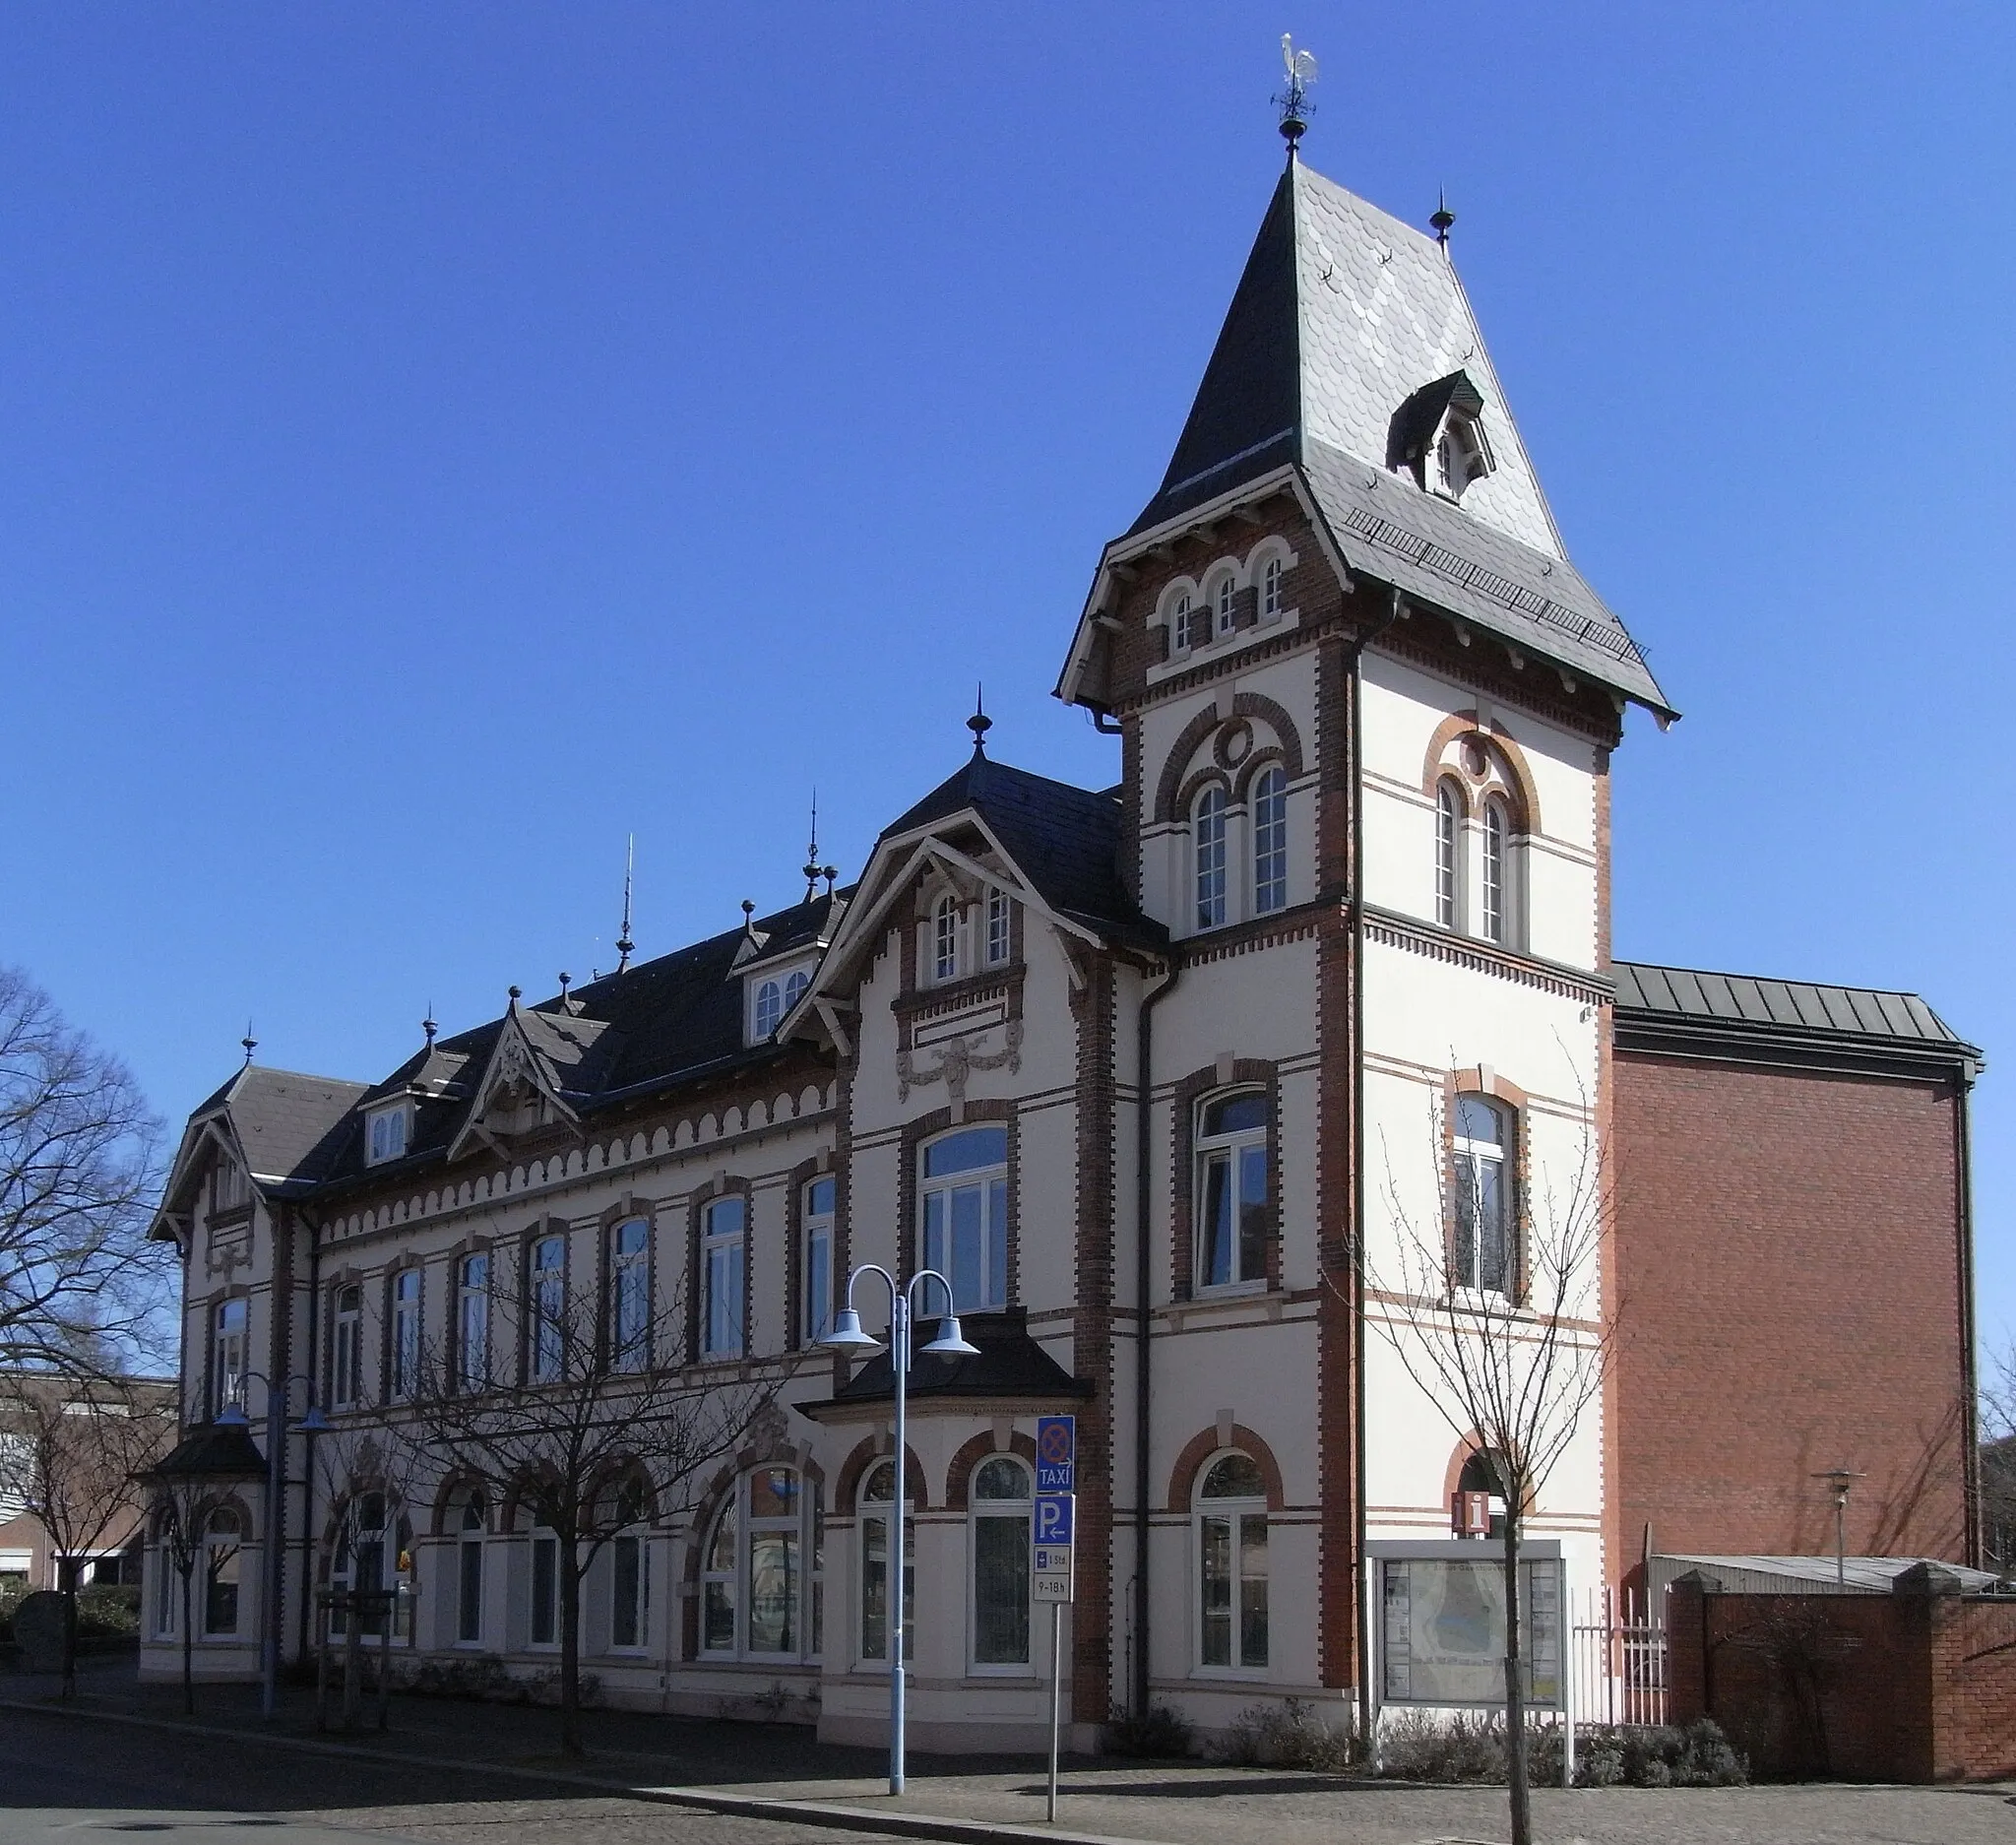 Photo showing: Central police station of Geeshacht, Schleswig-Holstein, Germany.